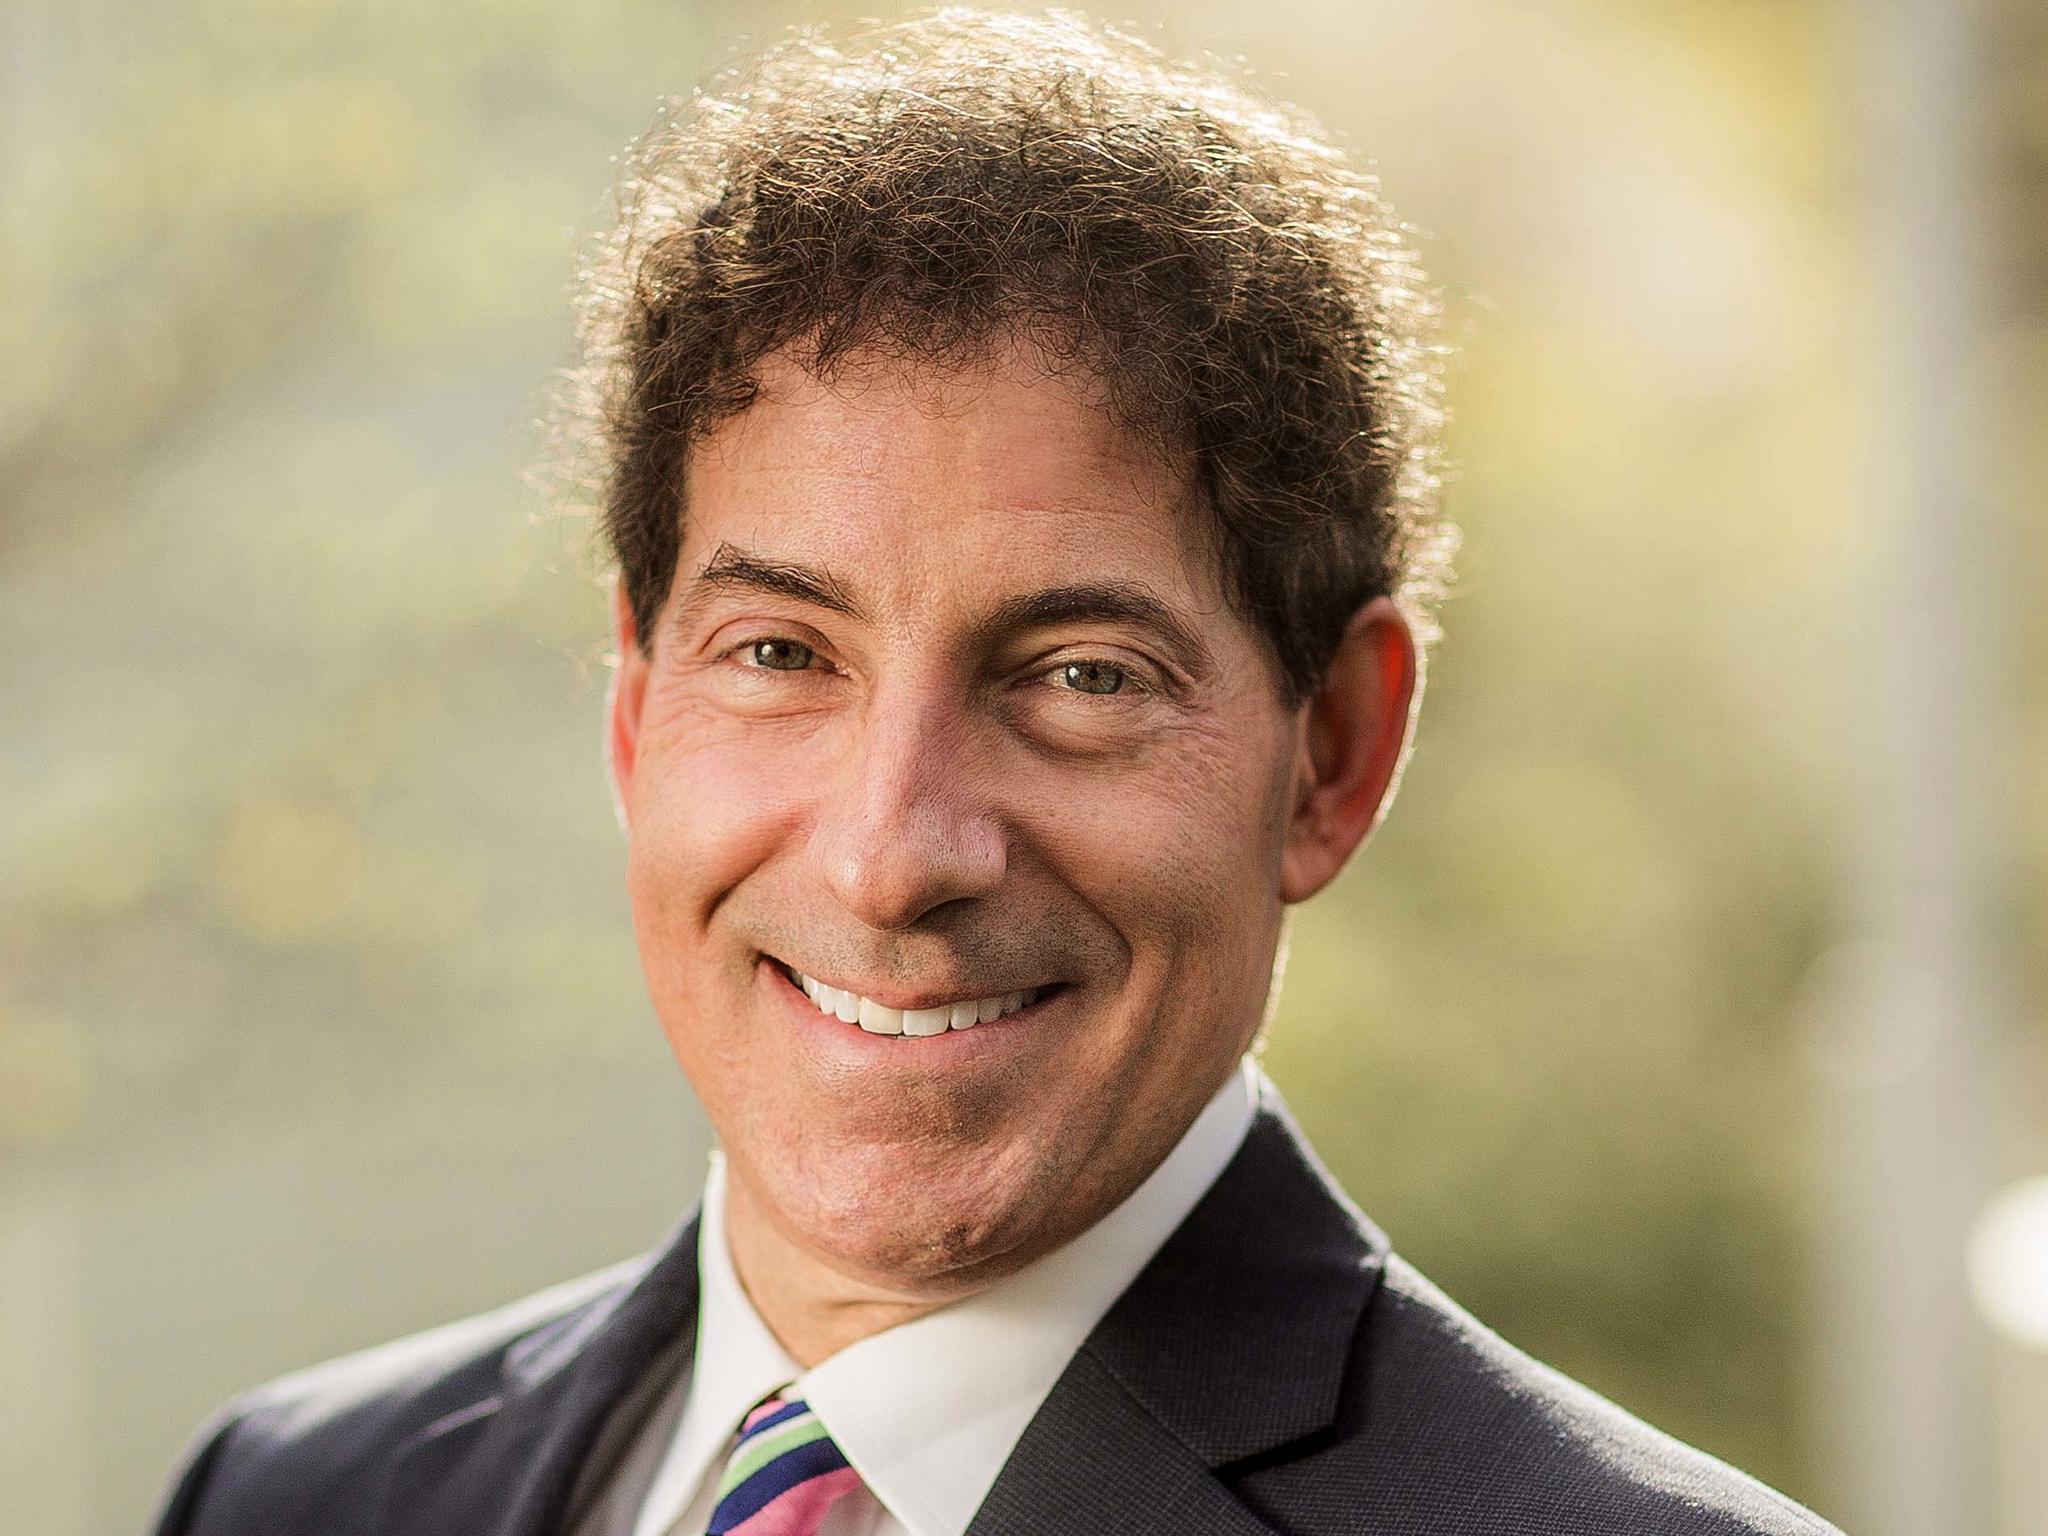 Jamin Raskin, a US congressman and law professor, is one of the "leftist" academics named on the public watchlist